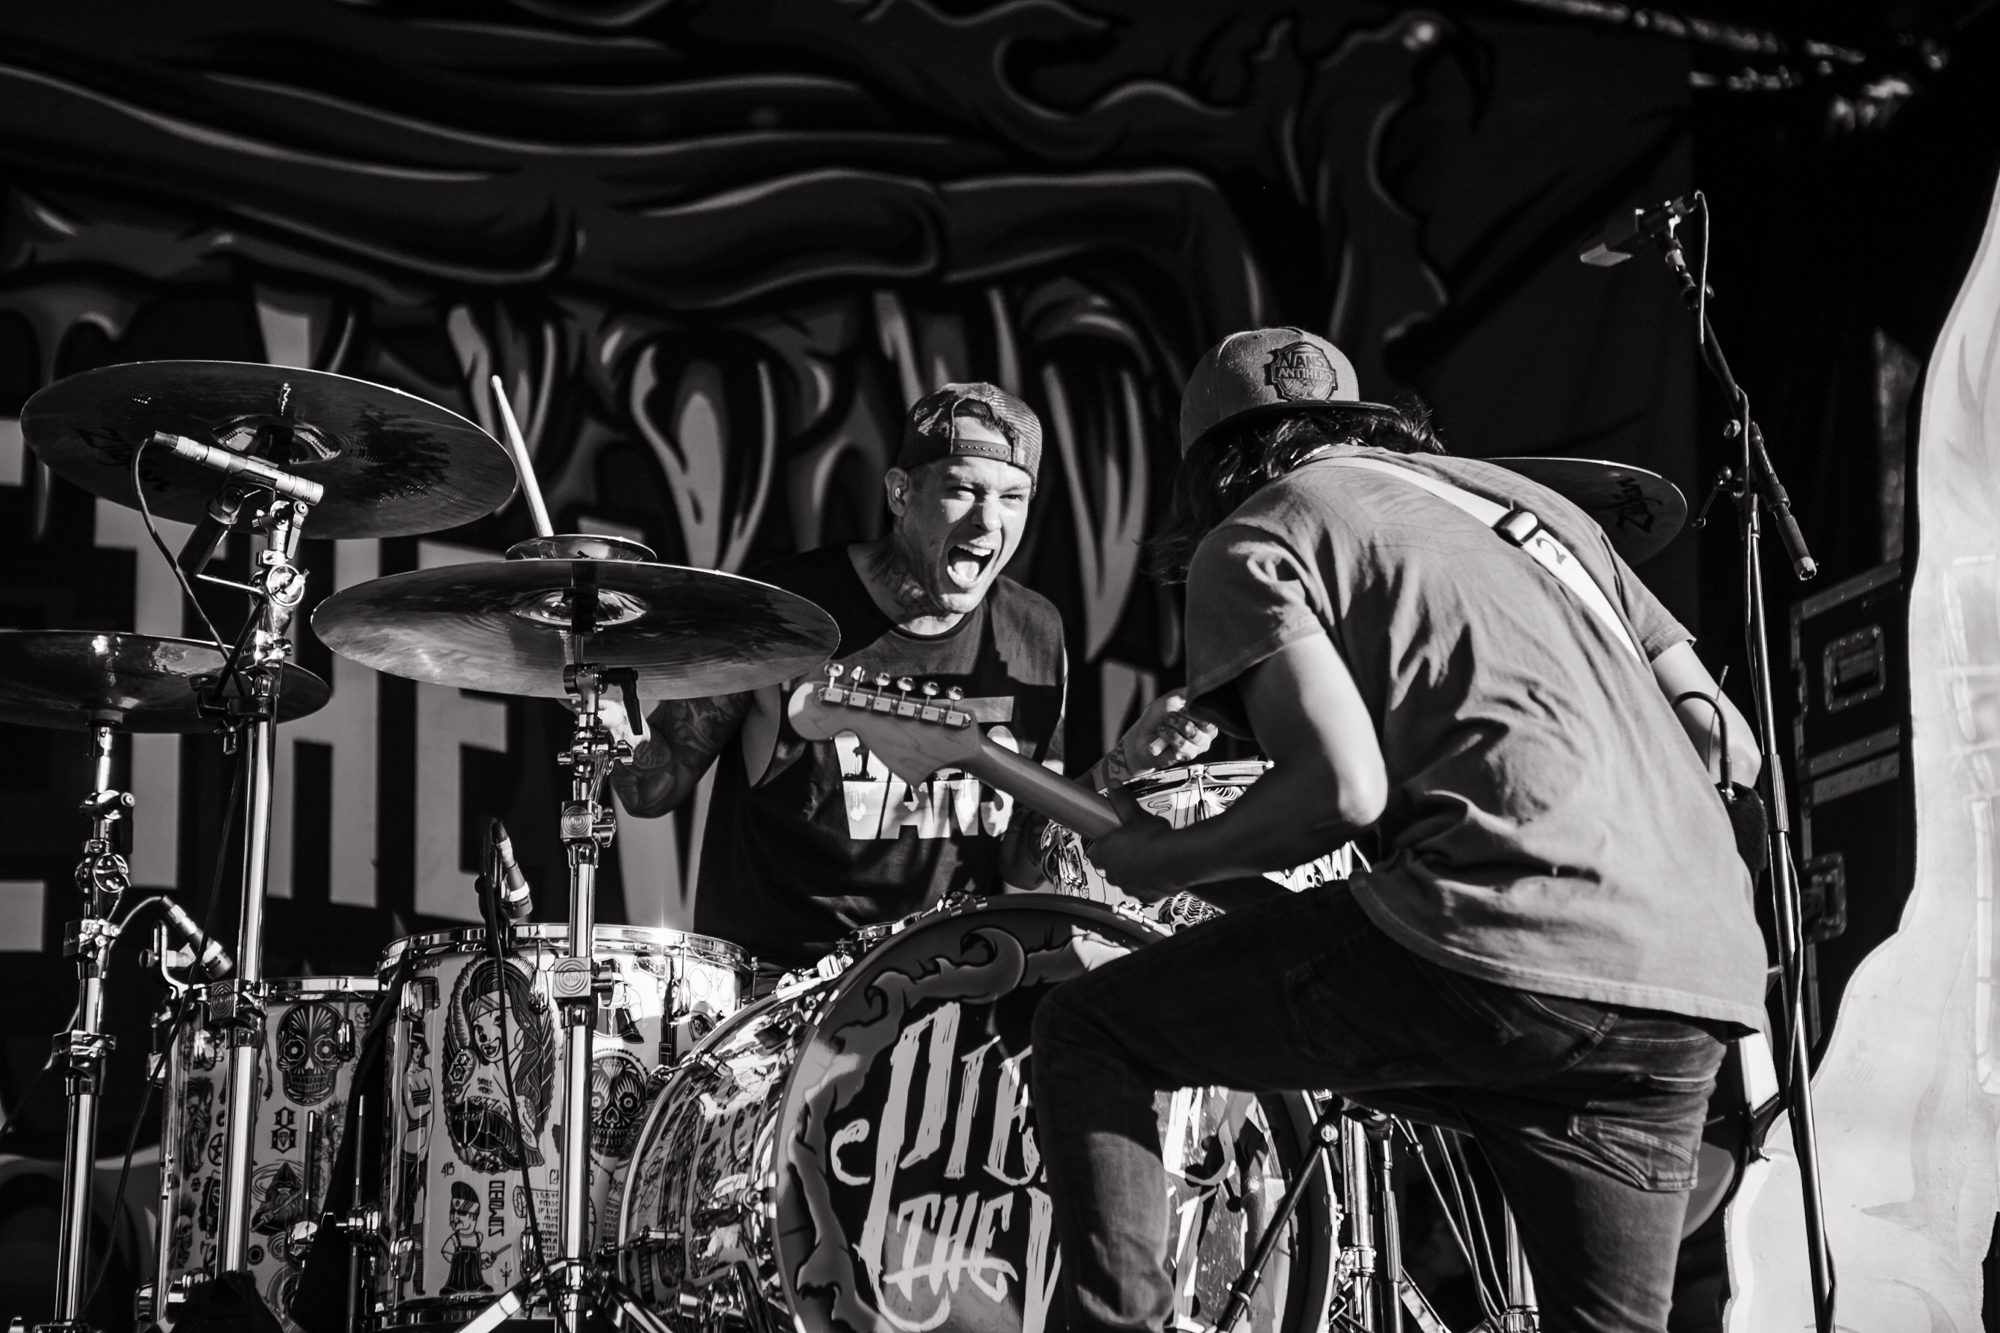 Vic & Mike Fuentes I call this "Brother Communication"